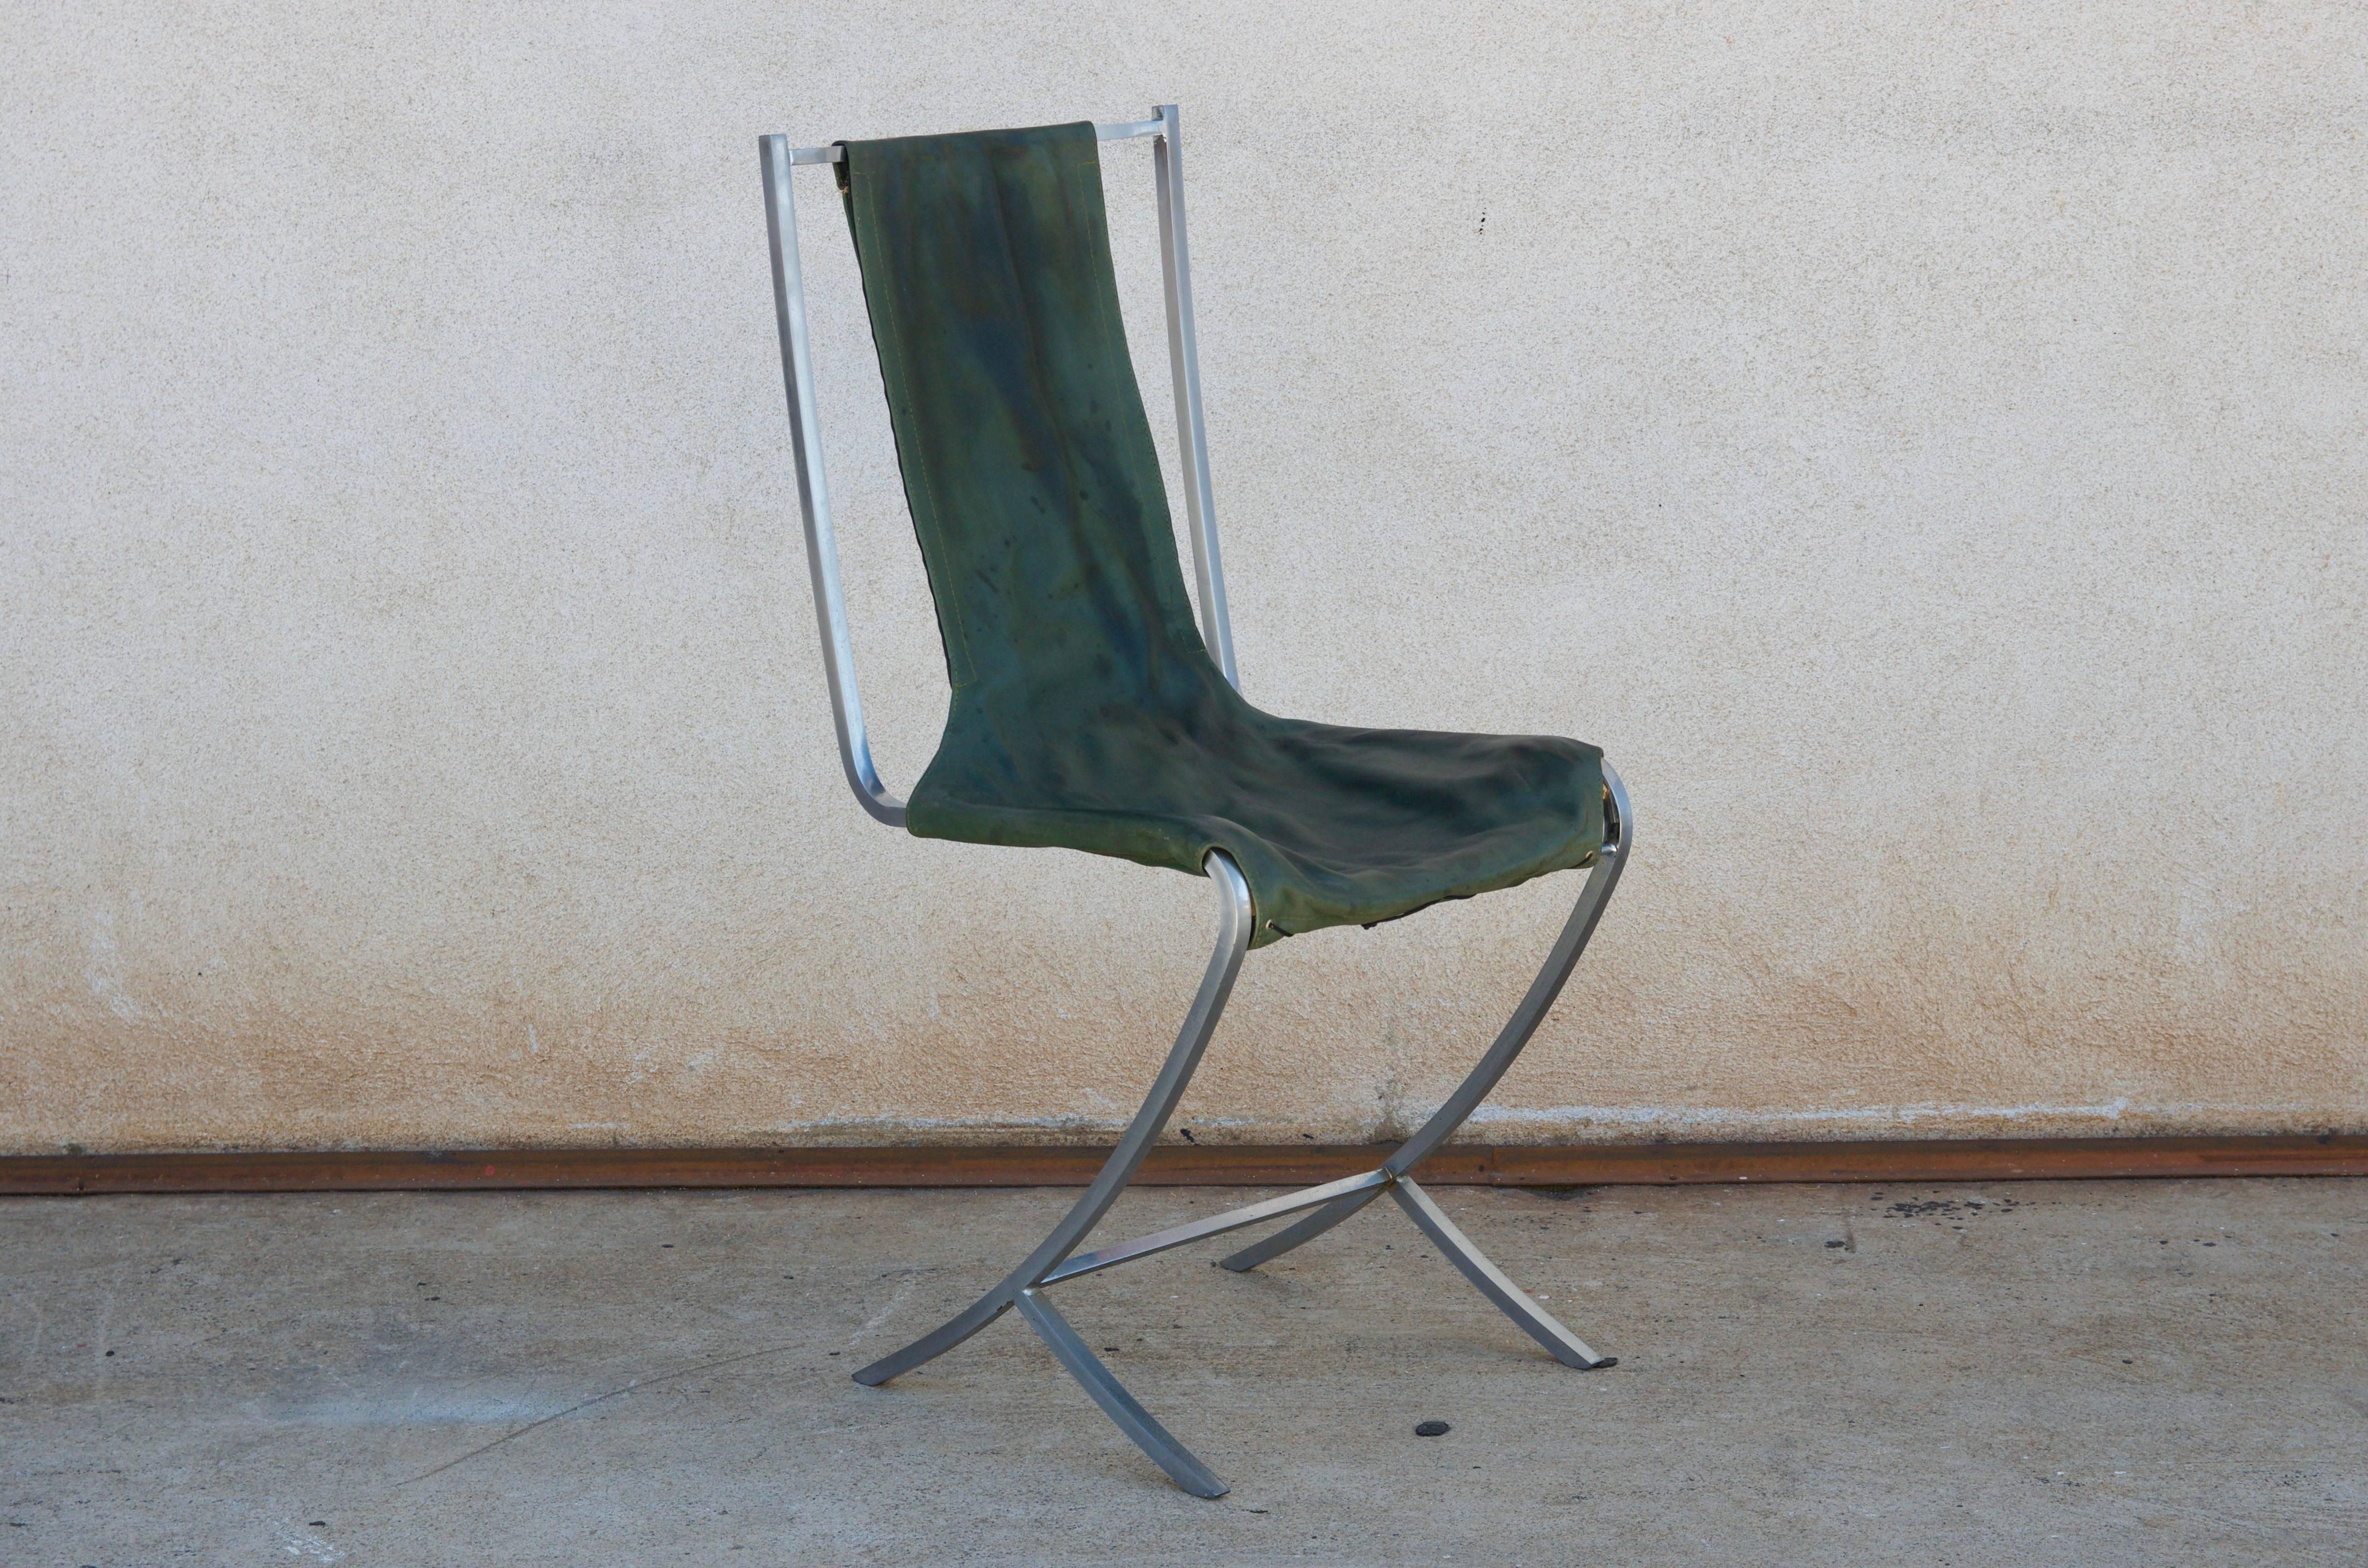 Rare set of five stainless steel (acier inoxydable) chairs by Maison Jansen. Manufactured by Usinox. Original green leather seat and back covers that need to be replaced with C. O. M. (6 yards).

Great as a set of five around a round table. Also